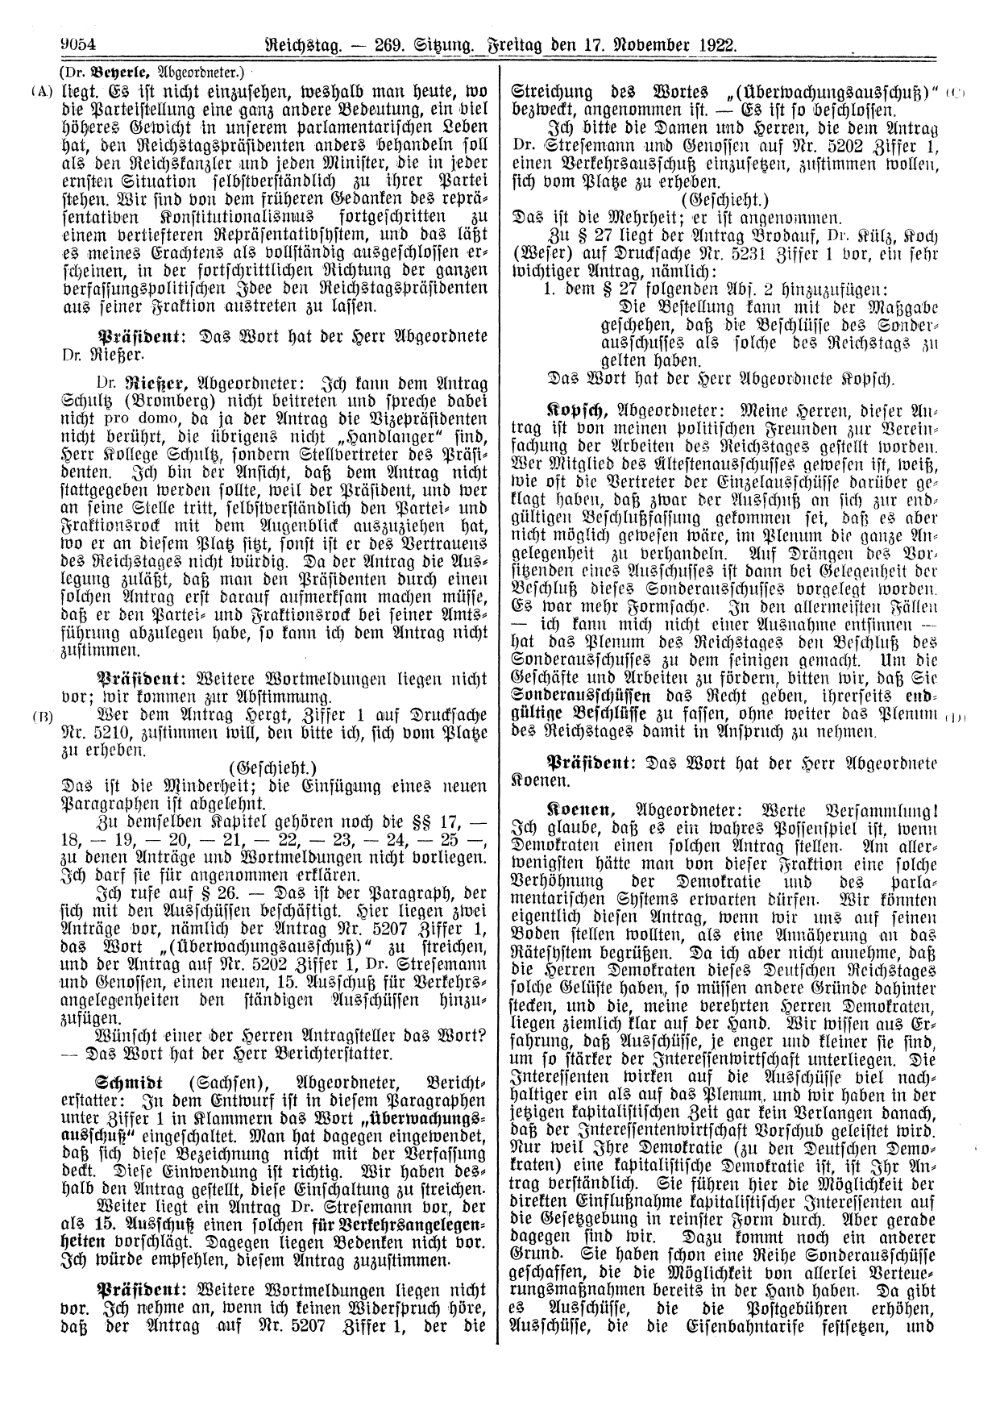 Scan of page 9054